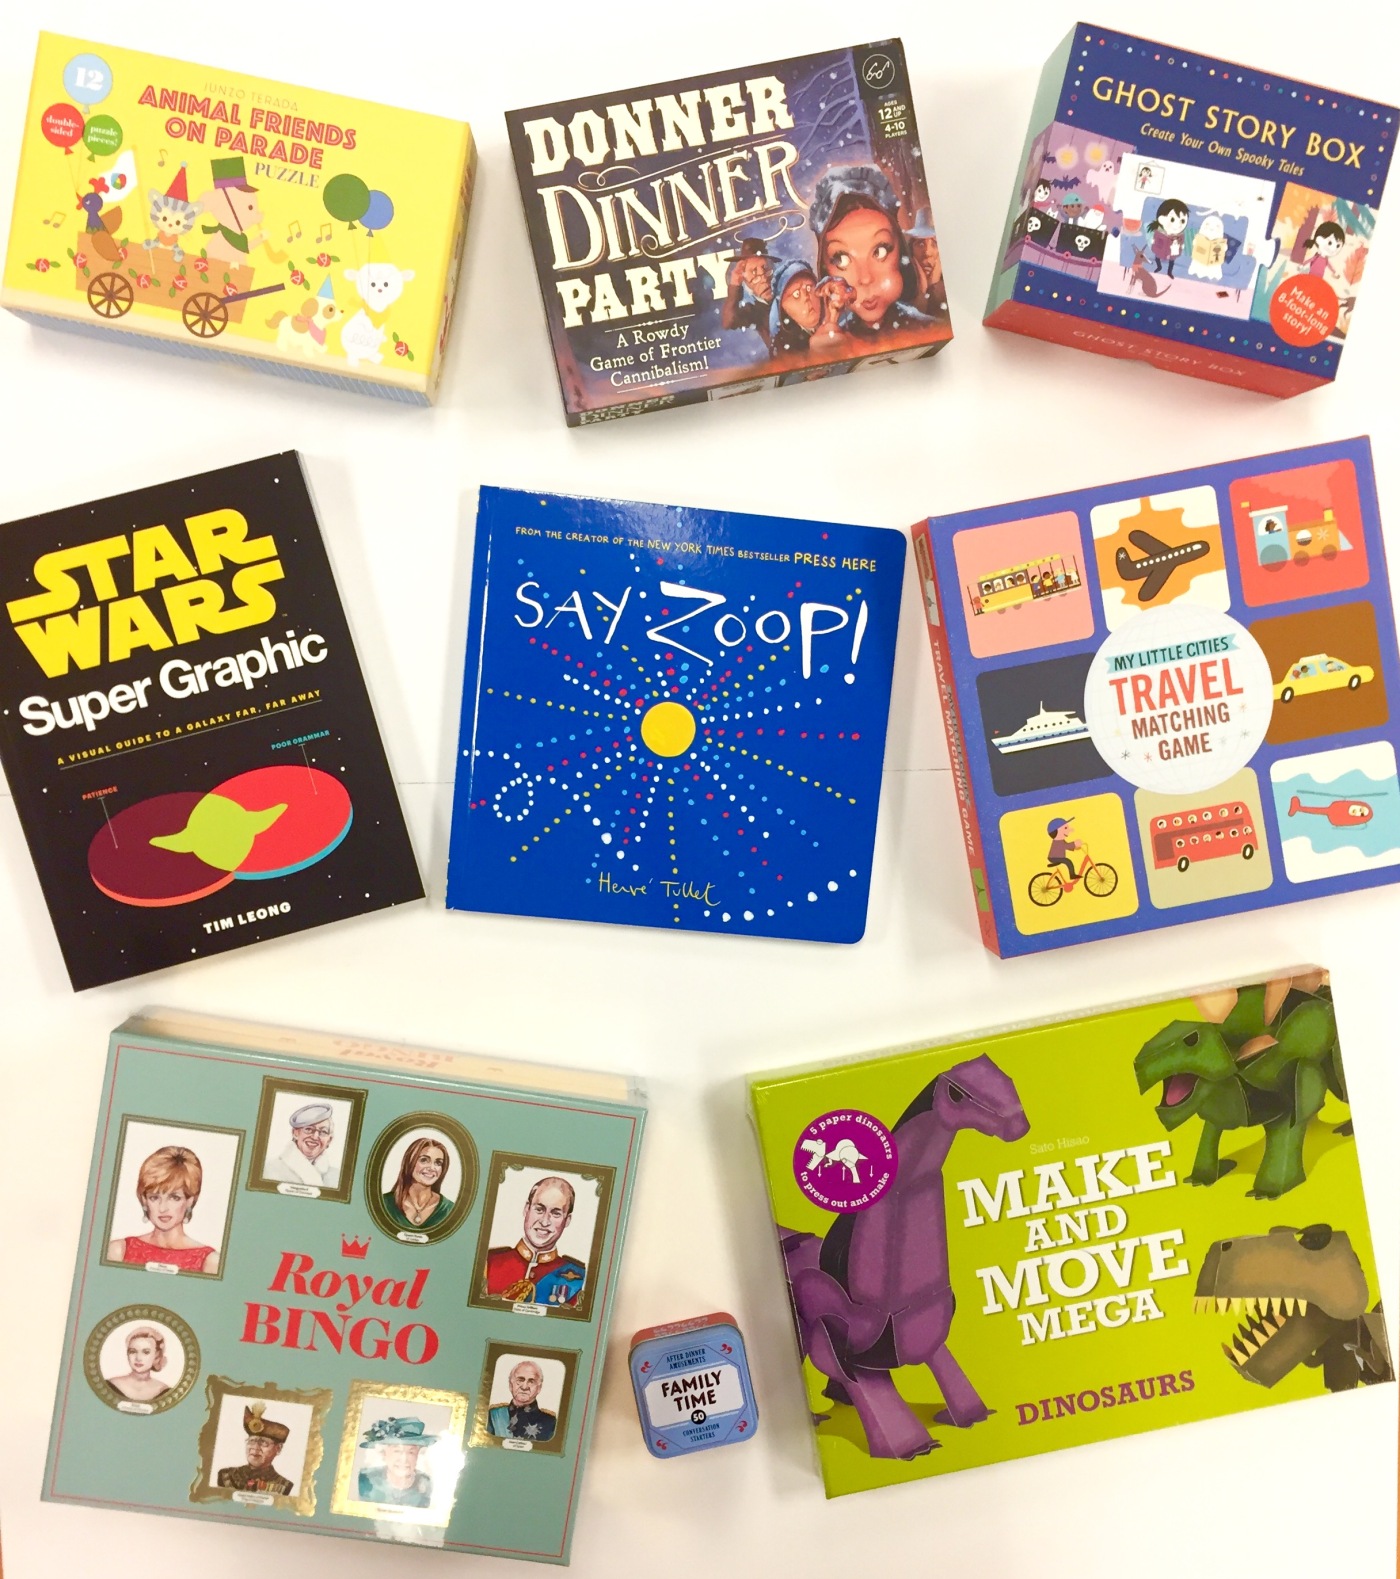 Book Time got to #PlayTestShare Family Time and Ghost Story Box and offers readers a contest for a chance to win one of nine activity books or games